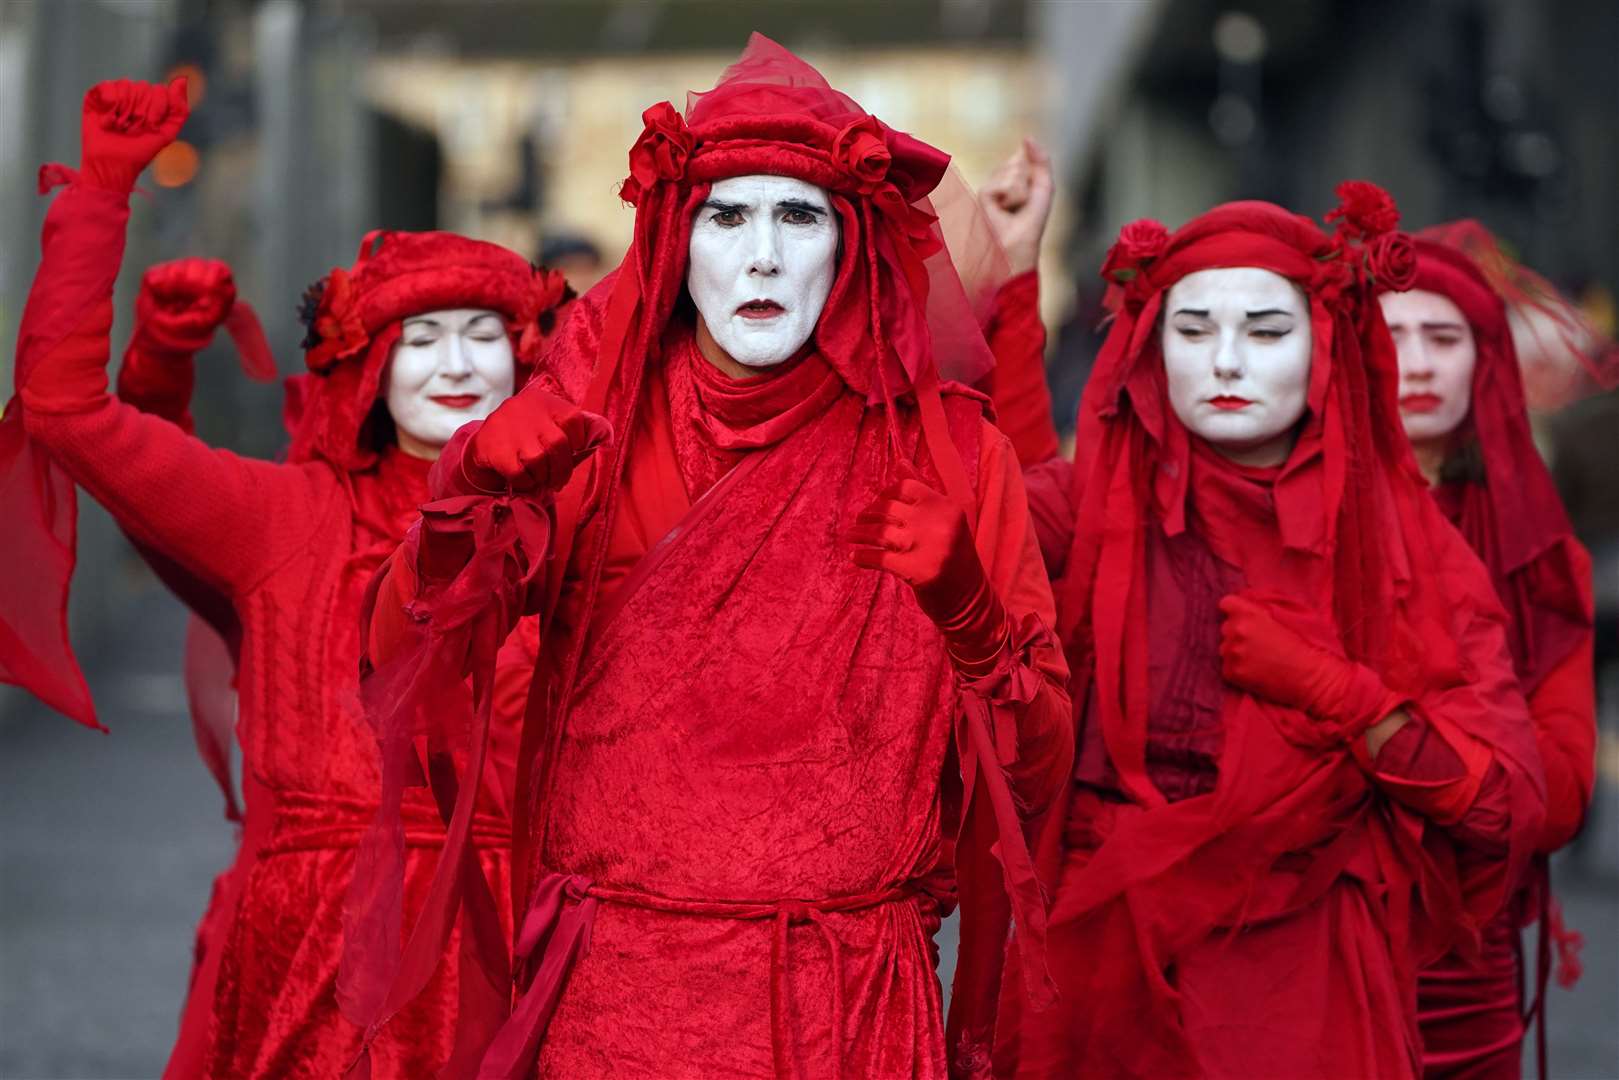 Extinction Rebellion Red Rebels during the official final day of the summit (Andrew Milligan/PA)